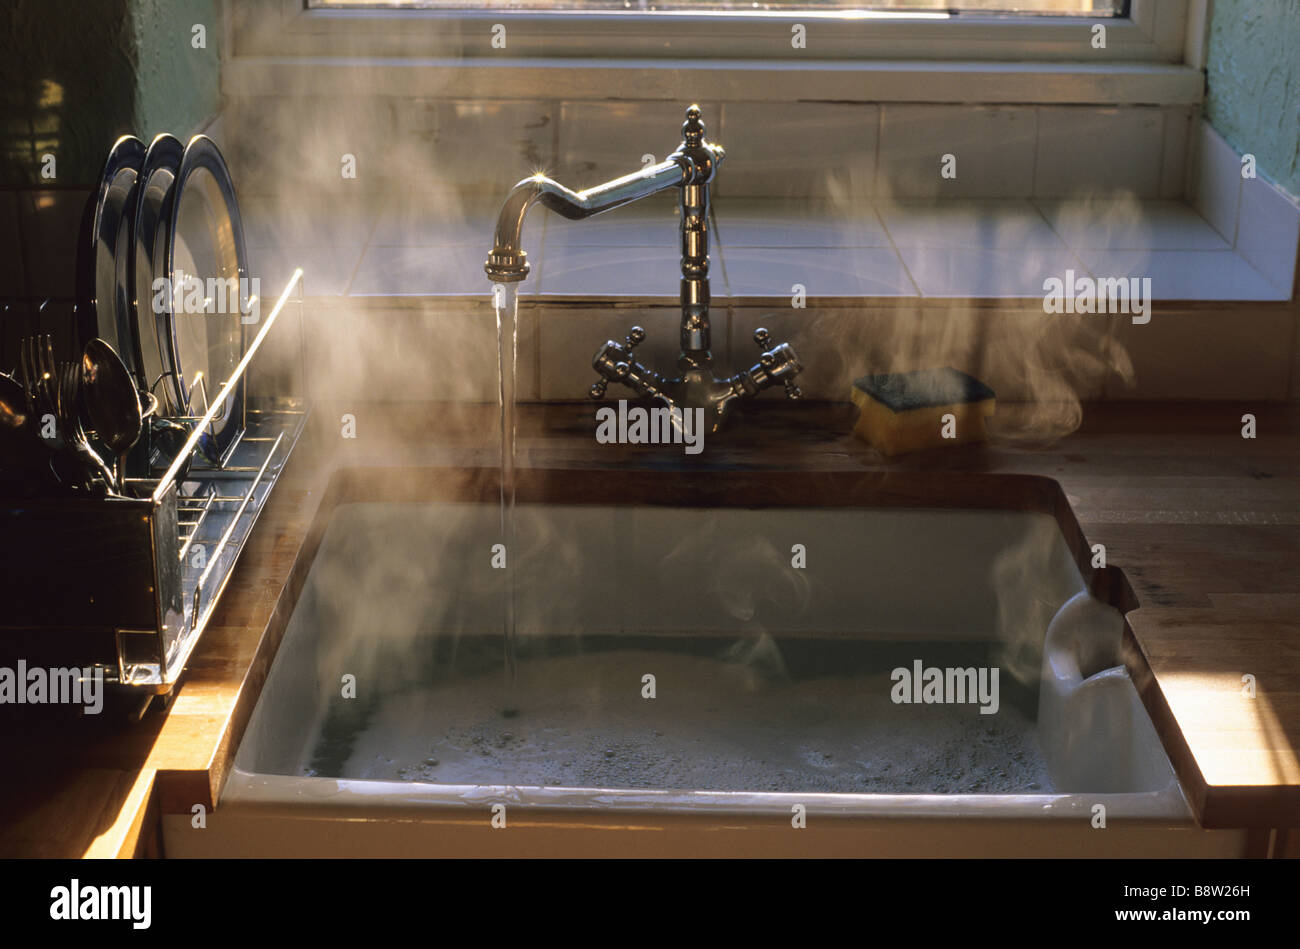 sunlight hitting steam rising from hot washing up water in kitchen sink Stock Photo